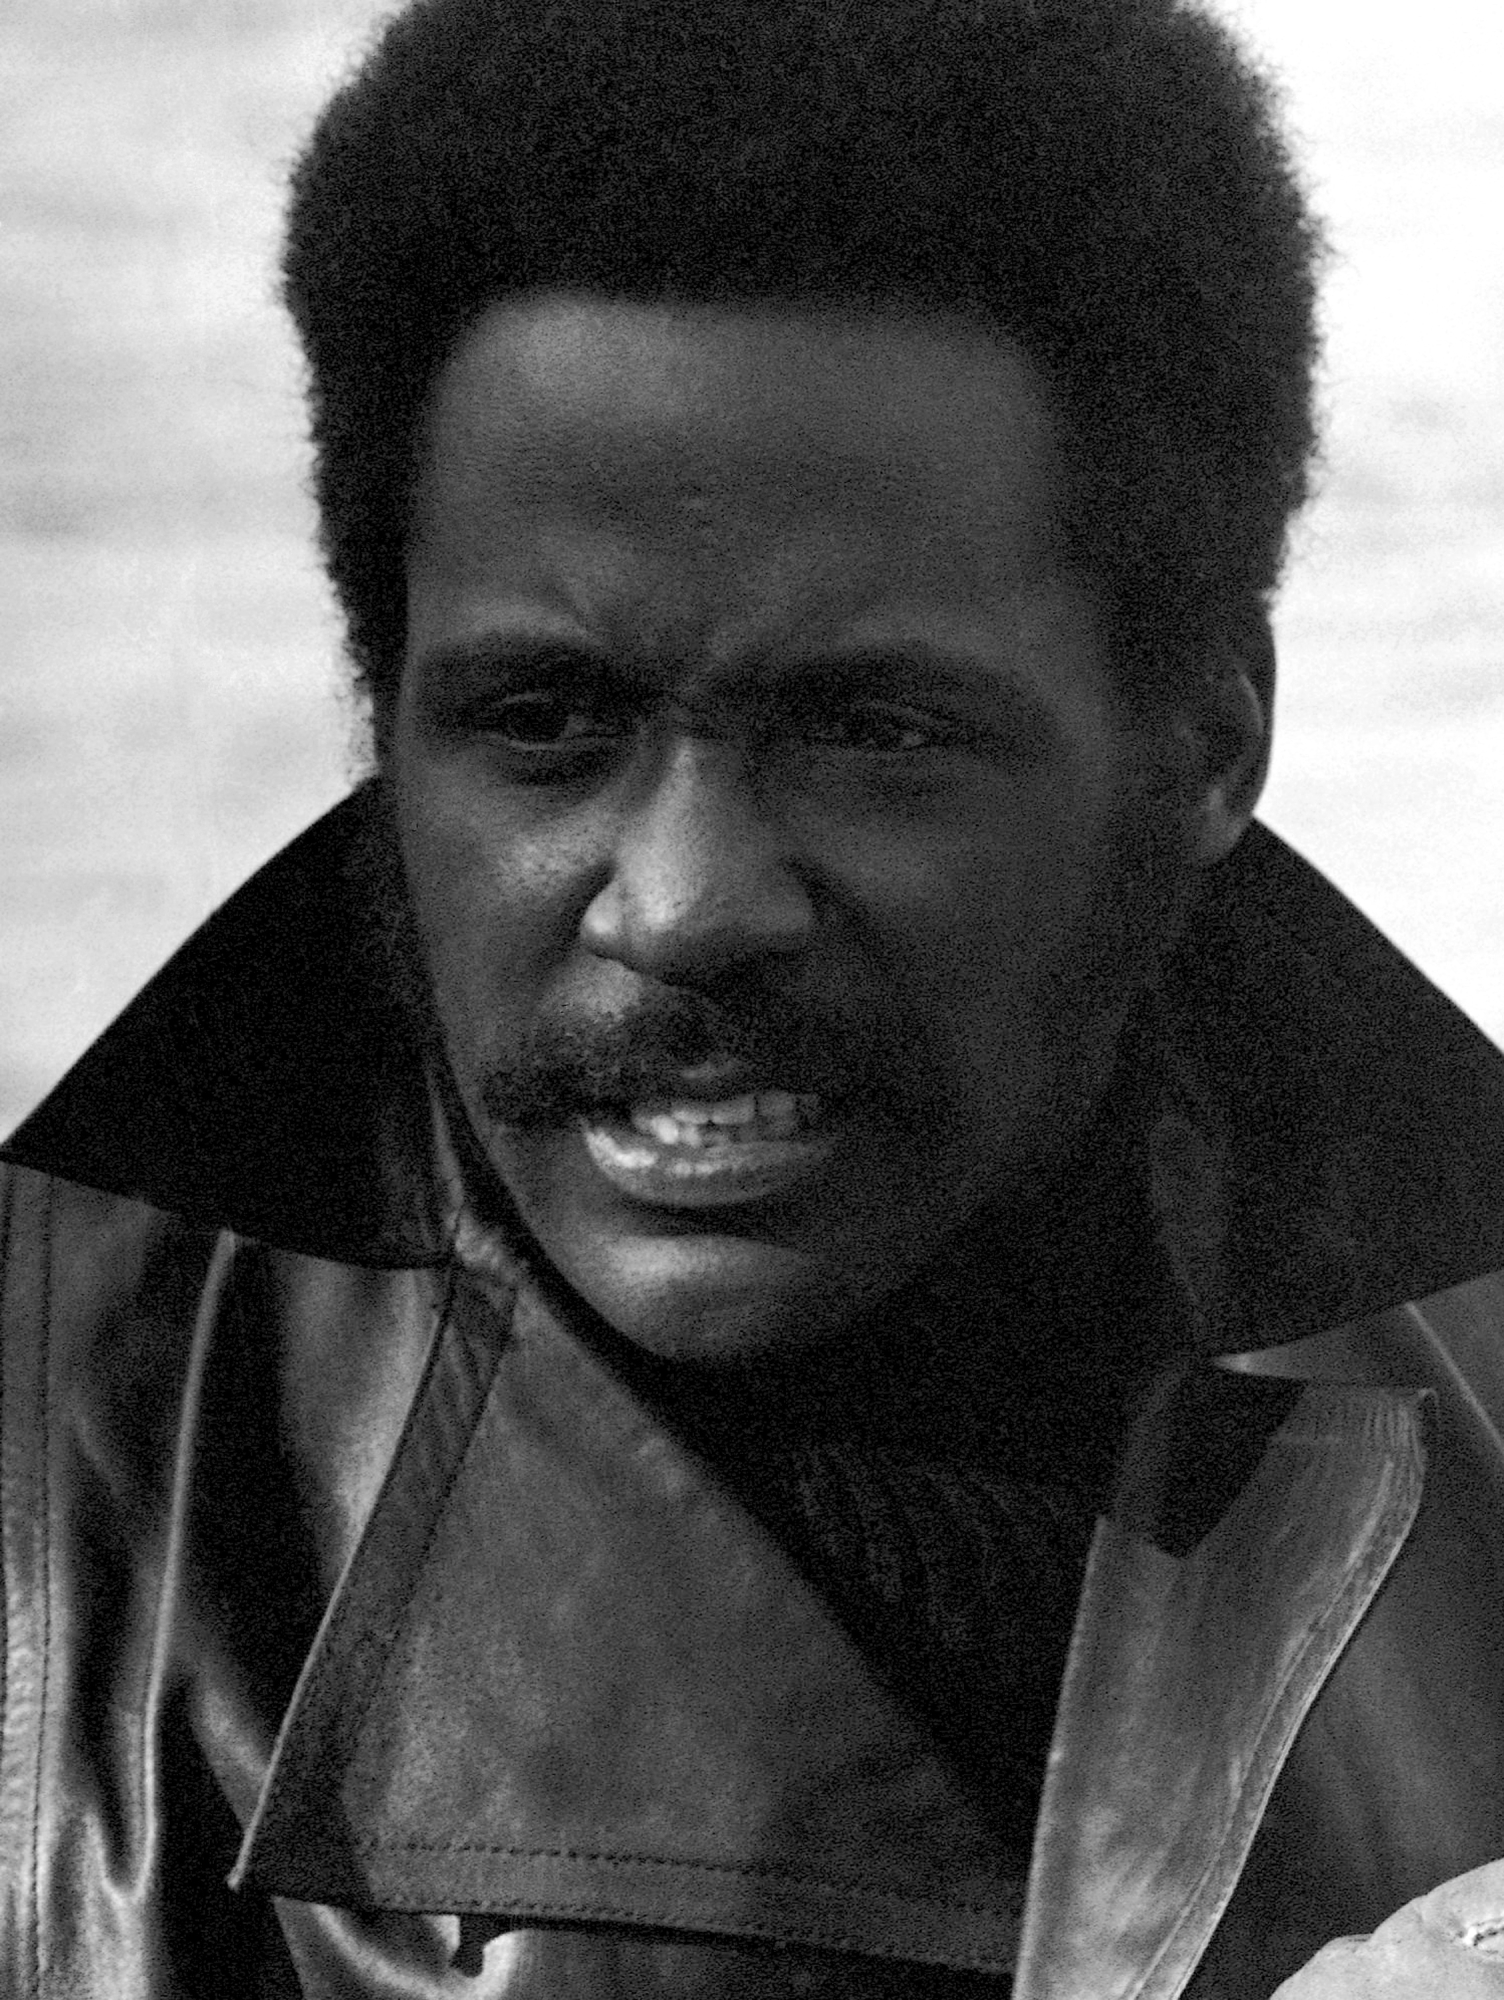 FILE - Richard Roundtree, one of the stars of "Big Bamboo," is seen during filming in New York, March 9, 1972. Roundtree, the trailblazing Black actor who starred as the ultra-smooth private detective ?Shaft? in several films beginning in the early 1970s, died. Roundtree died Tuesday, Oct. 24, 2023, at his home in Los Angeles, according to his longtime manager. He was 81.  (AP Photo/Ron Frehm, File)